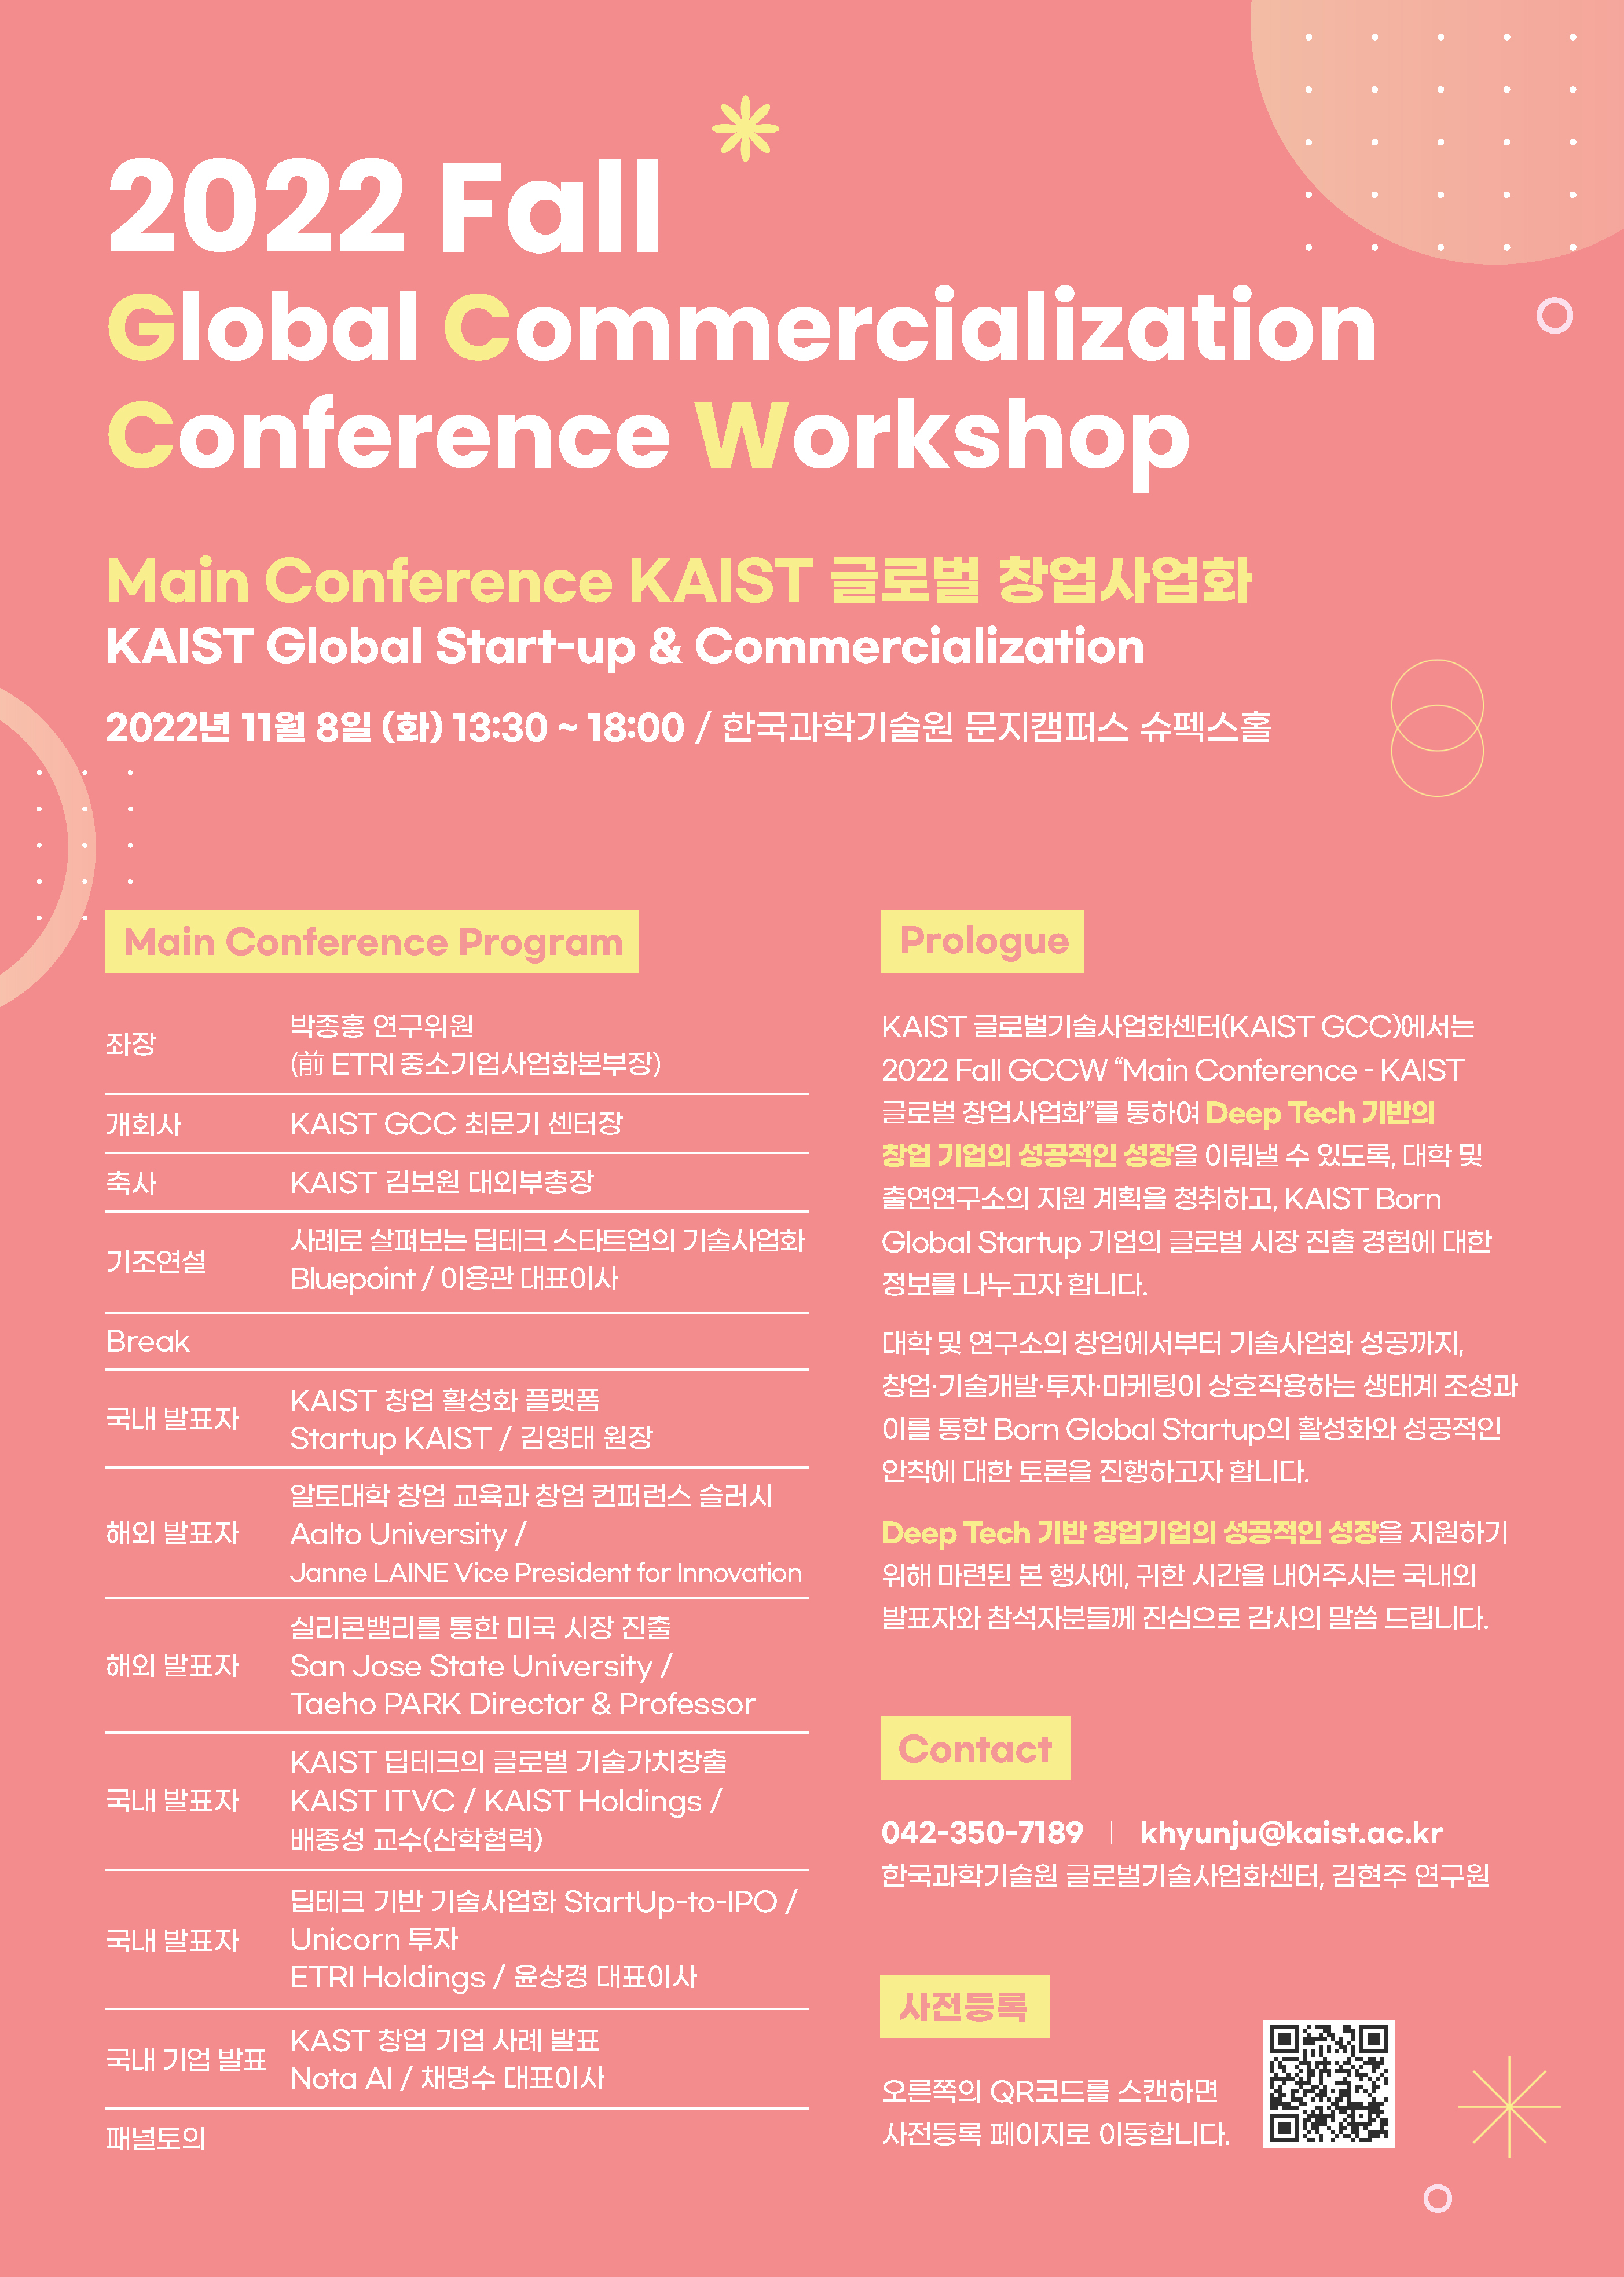 2022 Fall Global Commercialization Conference and Workshop (GCCW)